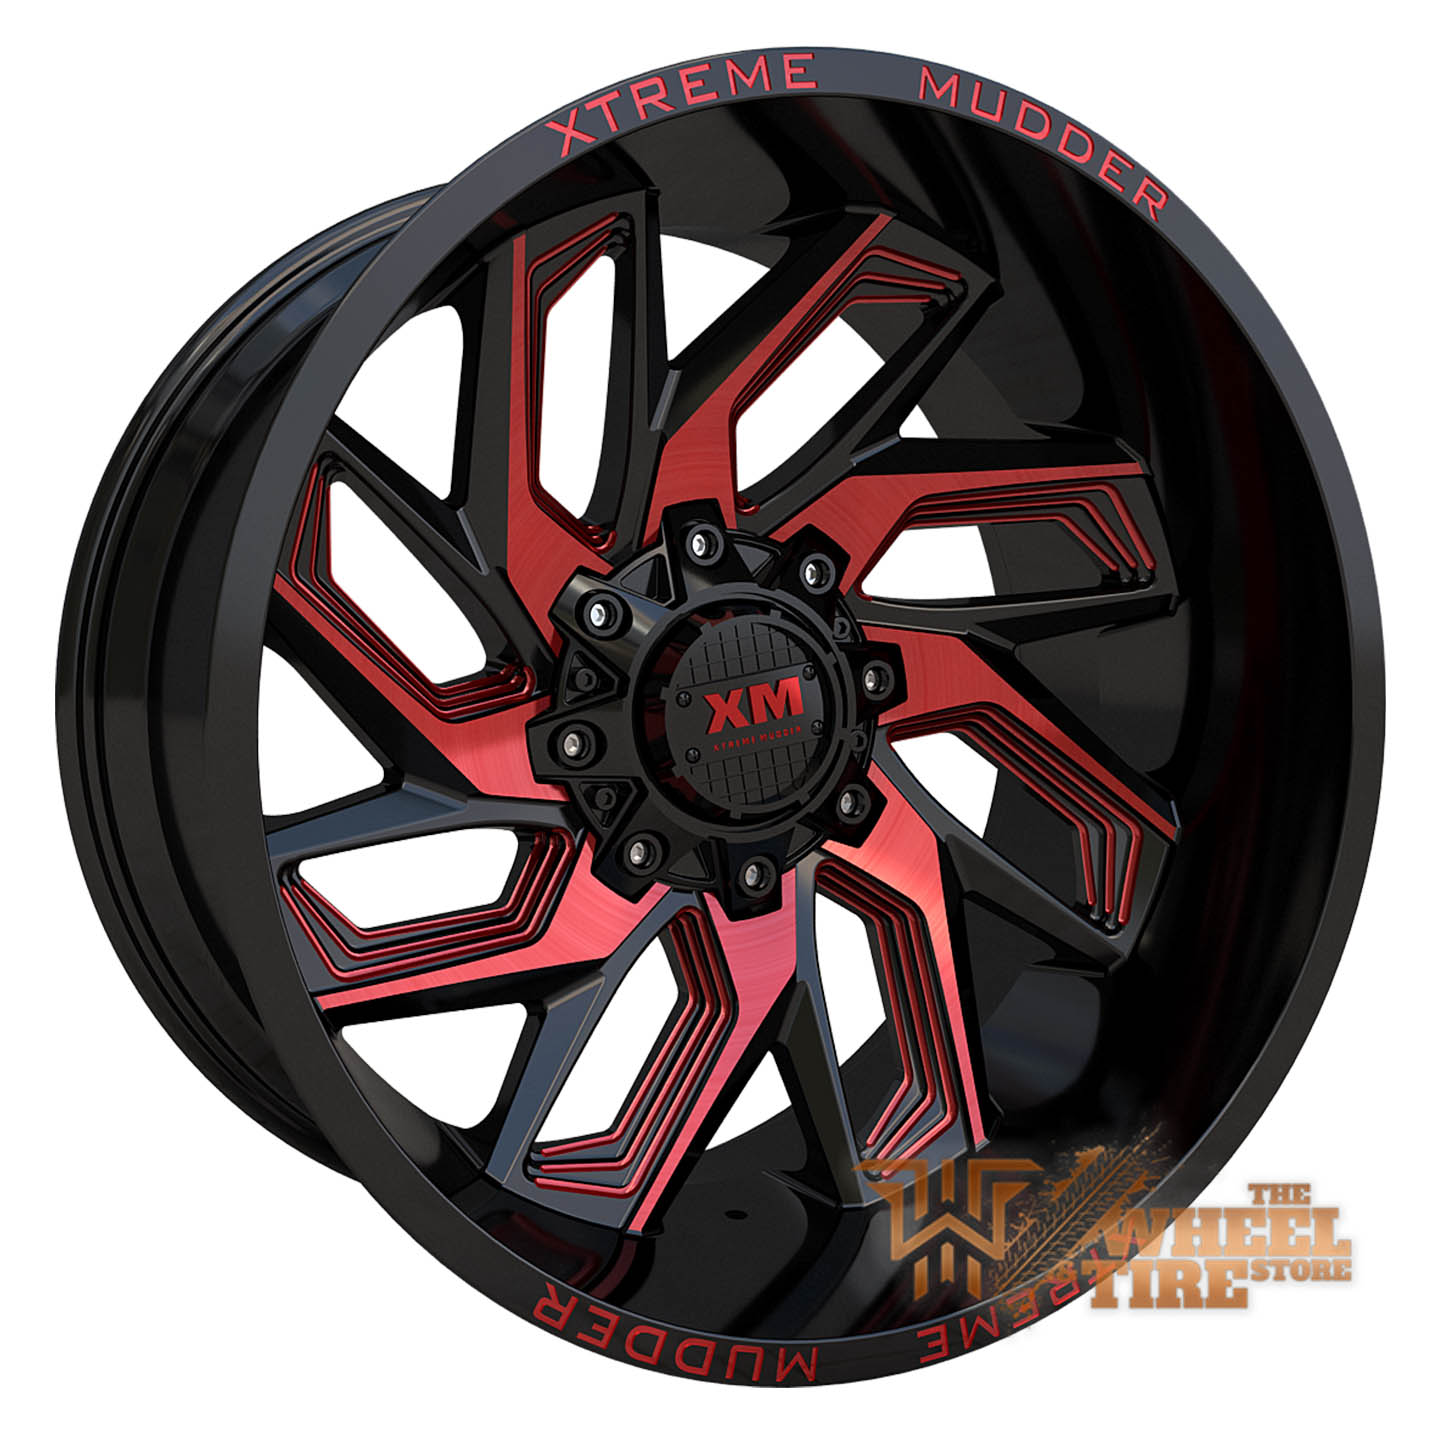 XTREME MUDDER XM-343 Wheel in Gloss Black Red Milled (Set of 4)